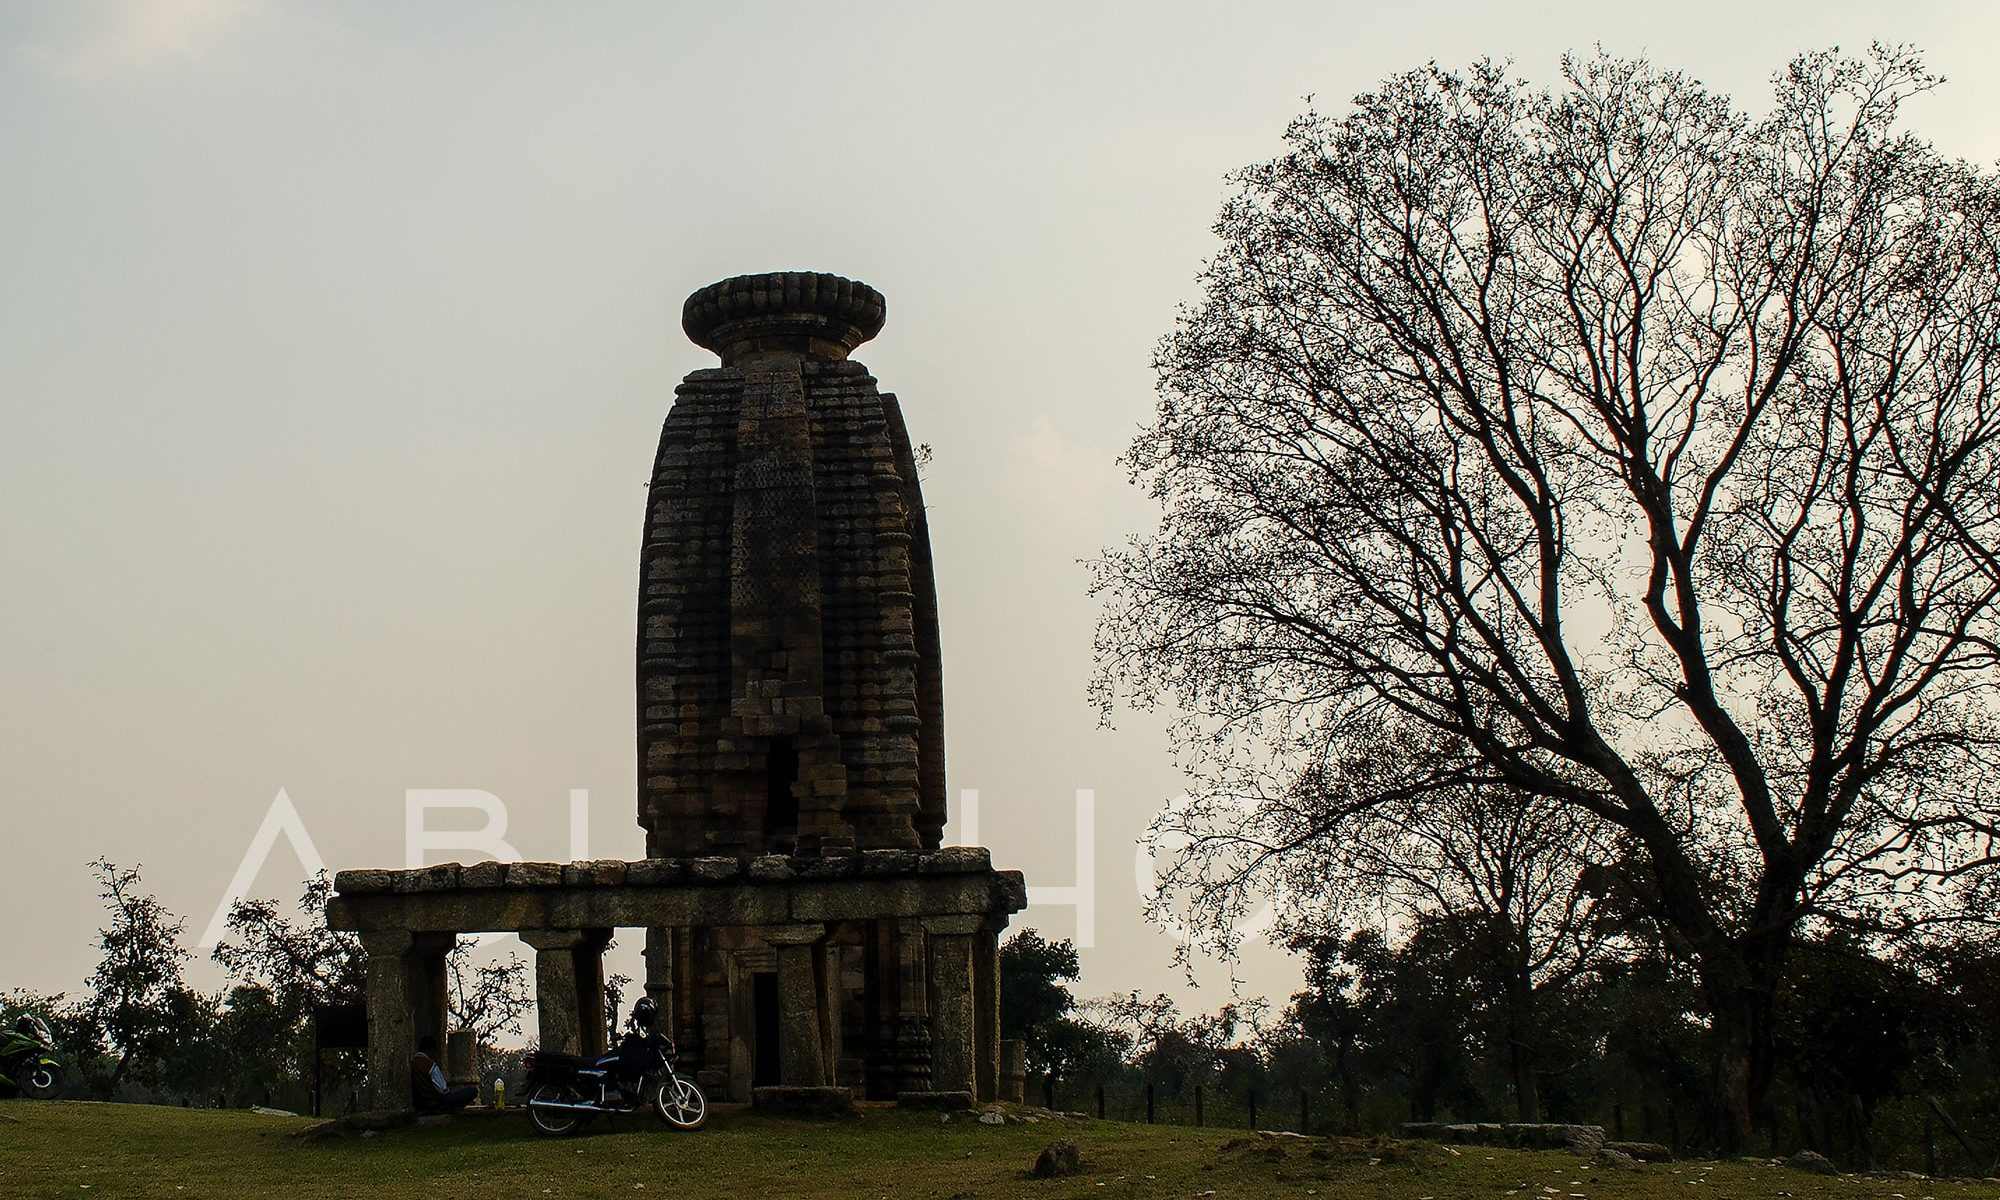 The temple of Banda is the finest stone structure found in Purulia.